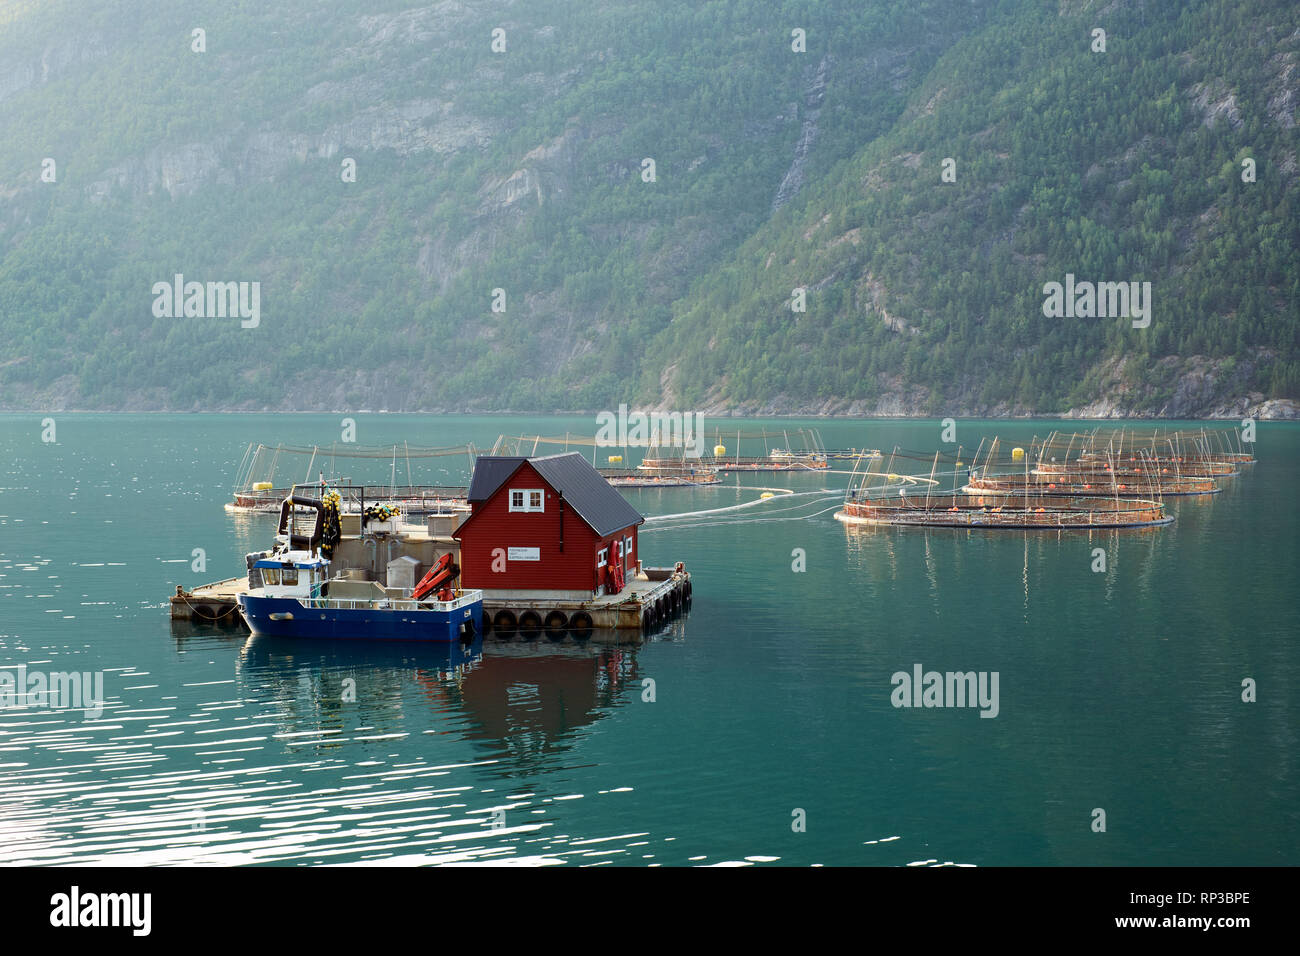 A typical floating aquaculture Salmon fish farm in a Norwegian fjord. Stock Photo